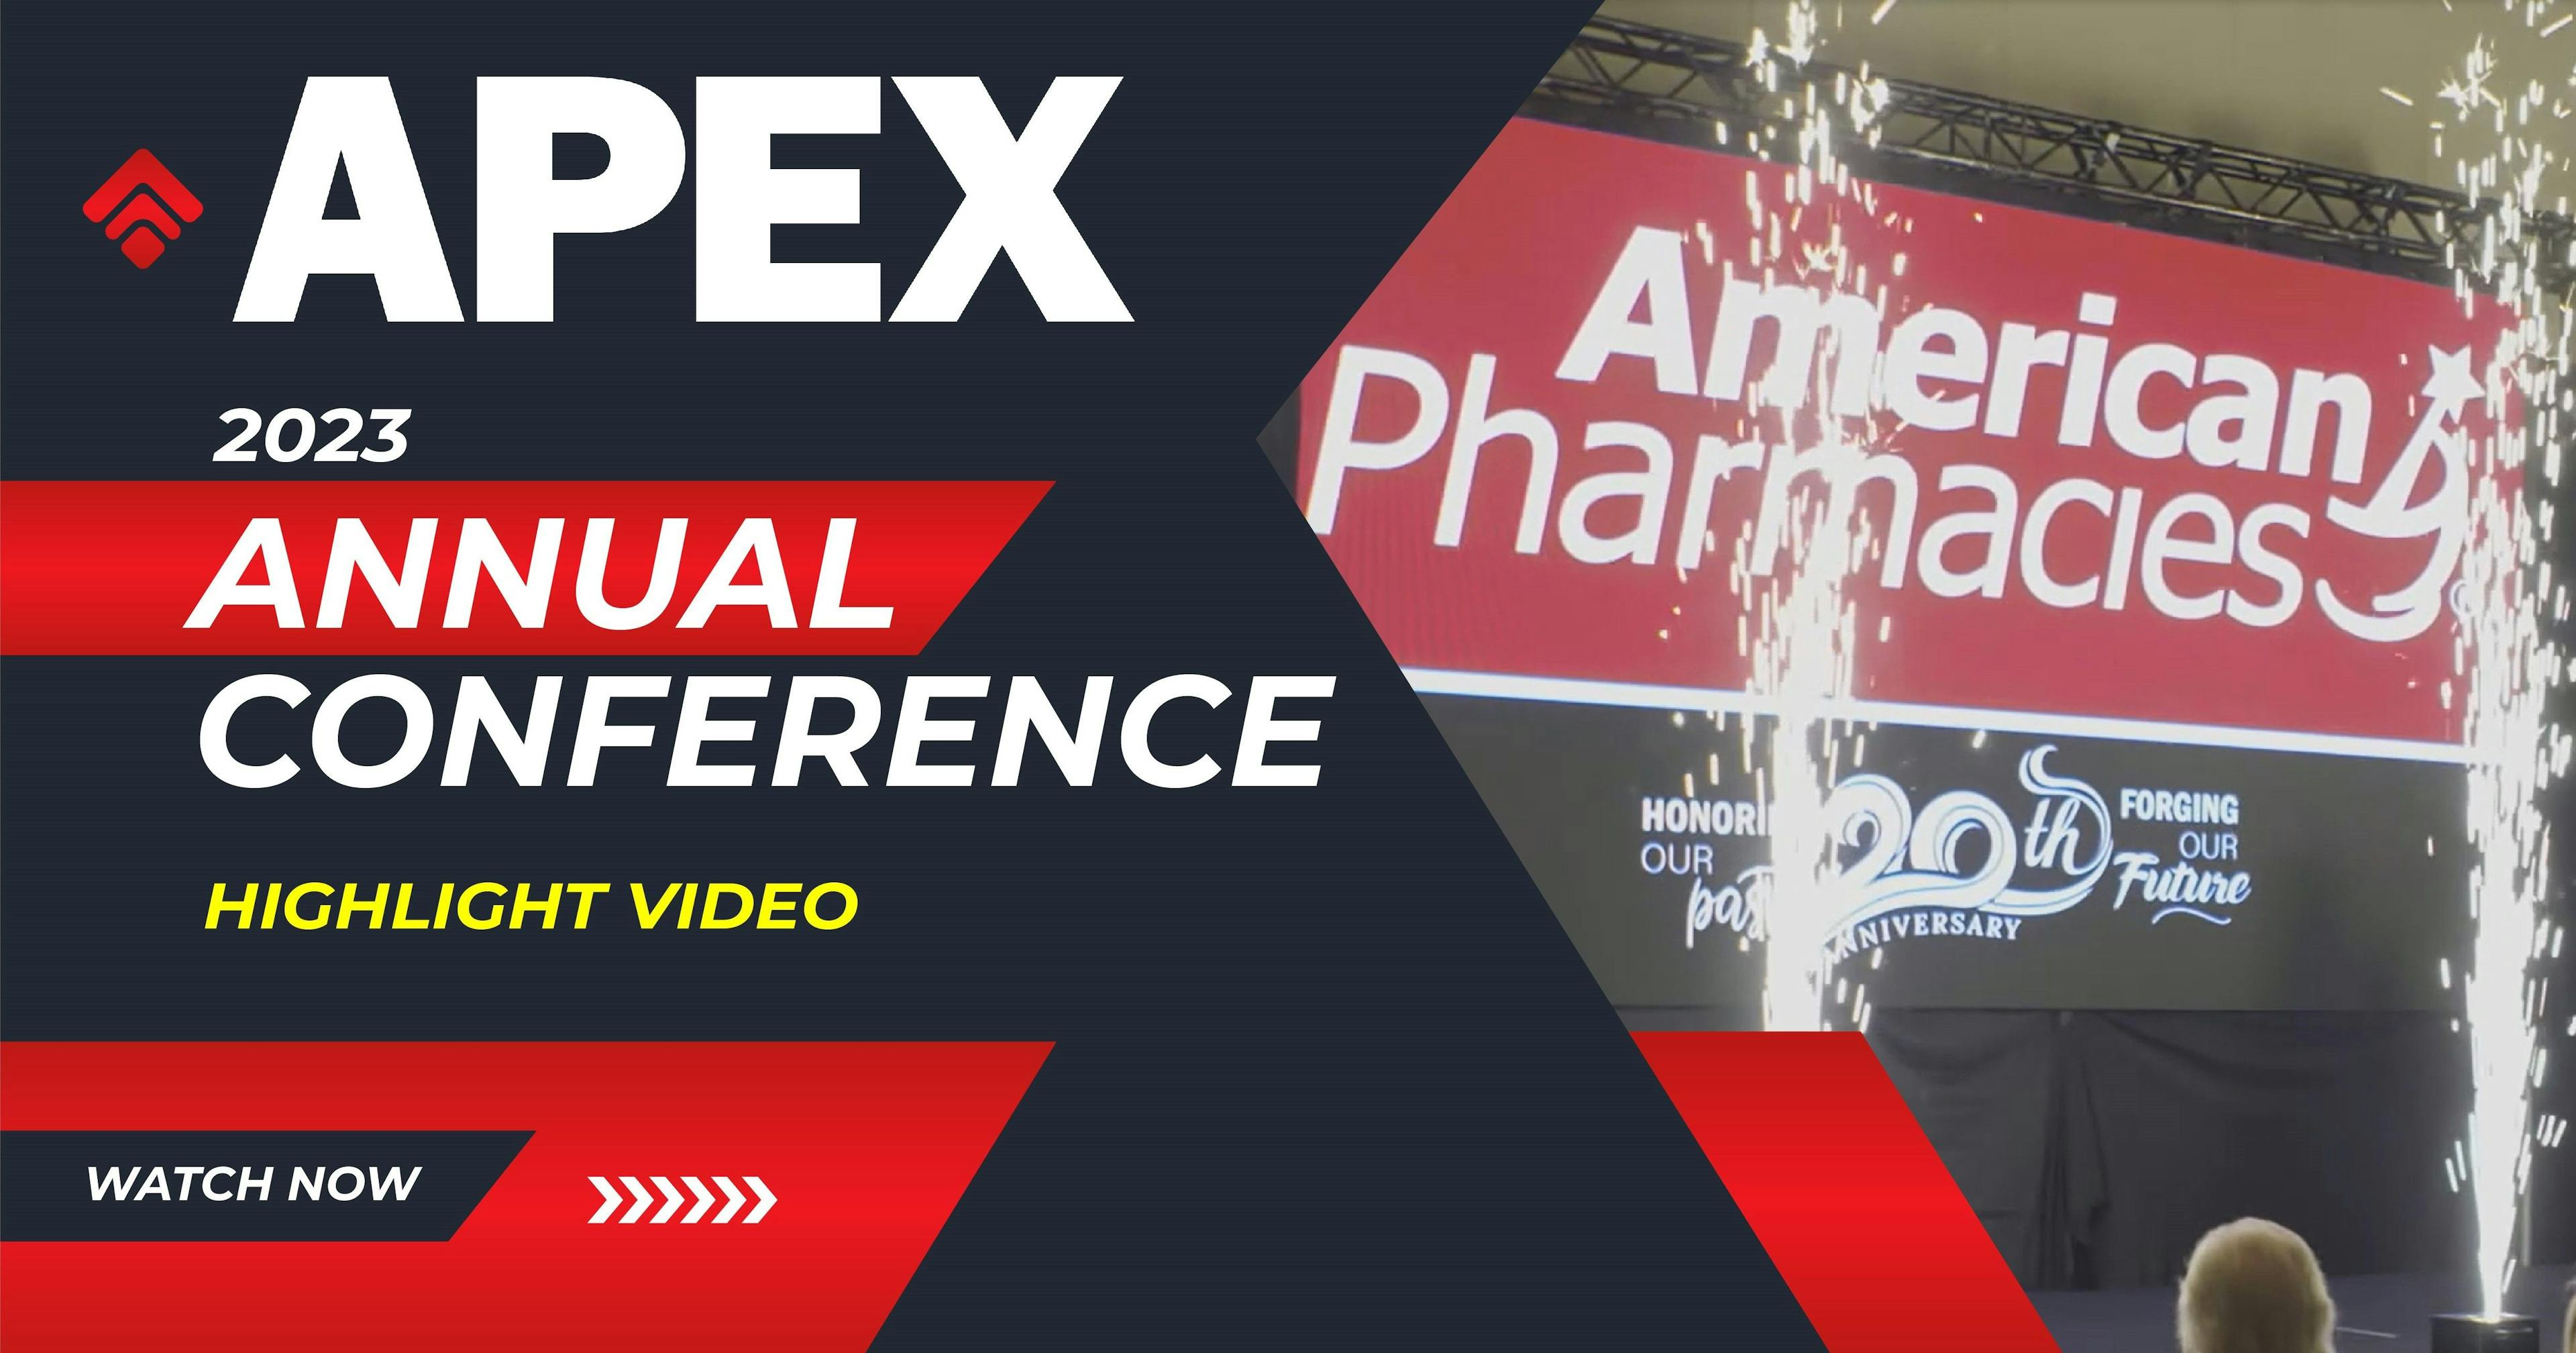 Highlights from APEX 2023: American Pharmacies Annual Conference